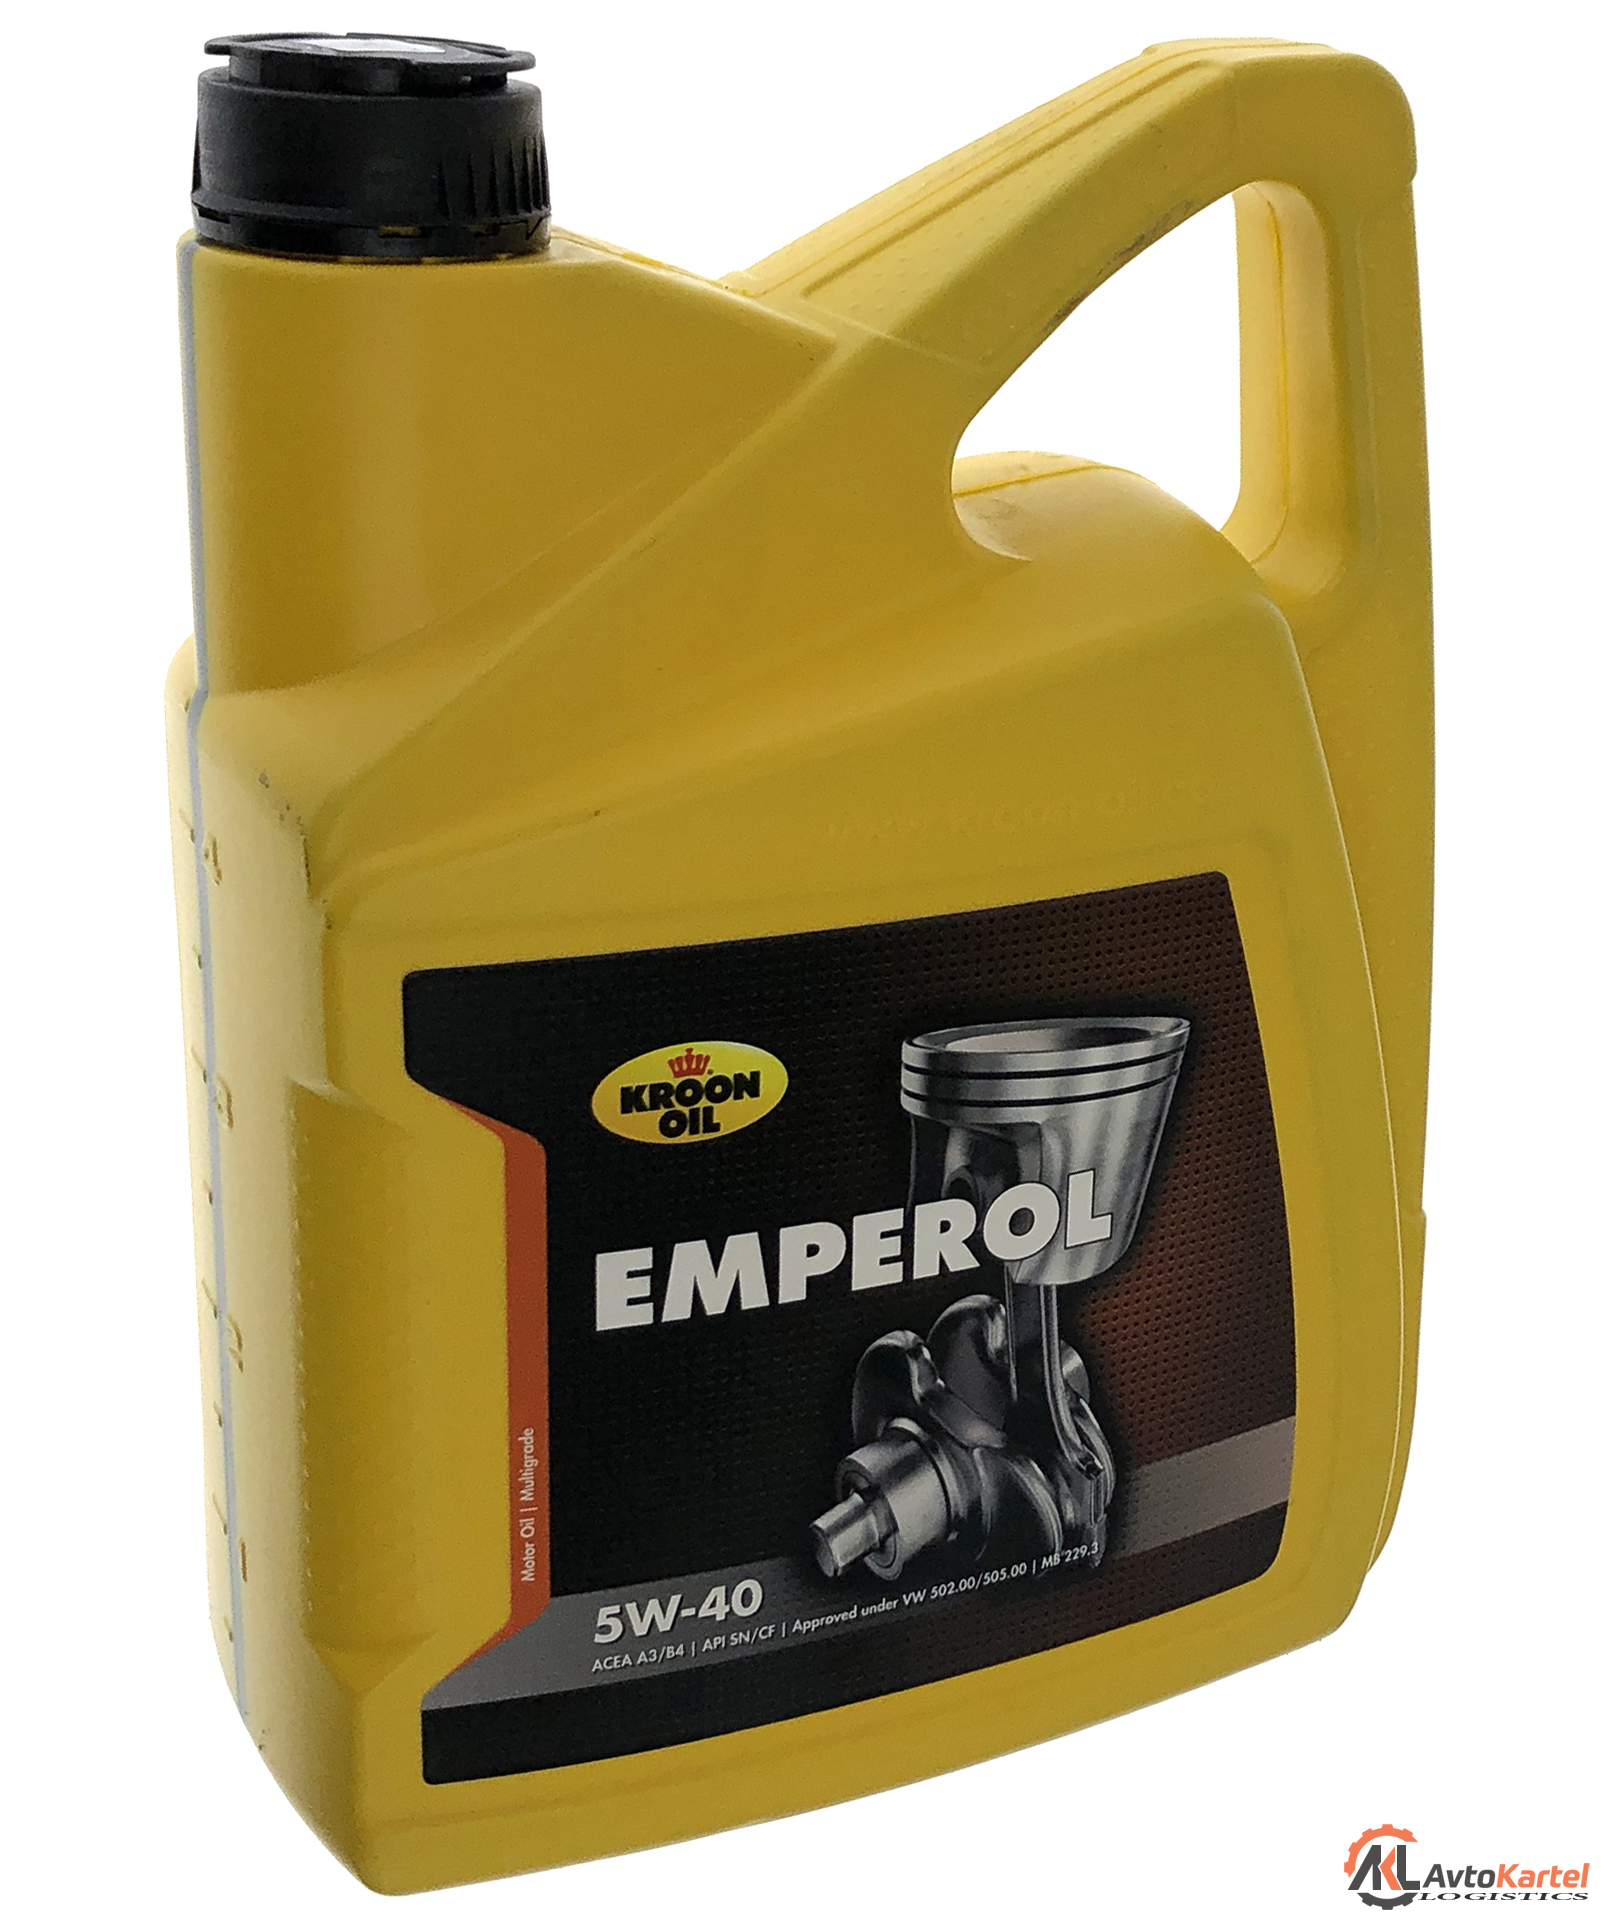 Масло моторное Emperol 5W40 5L KROON-OIL